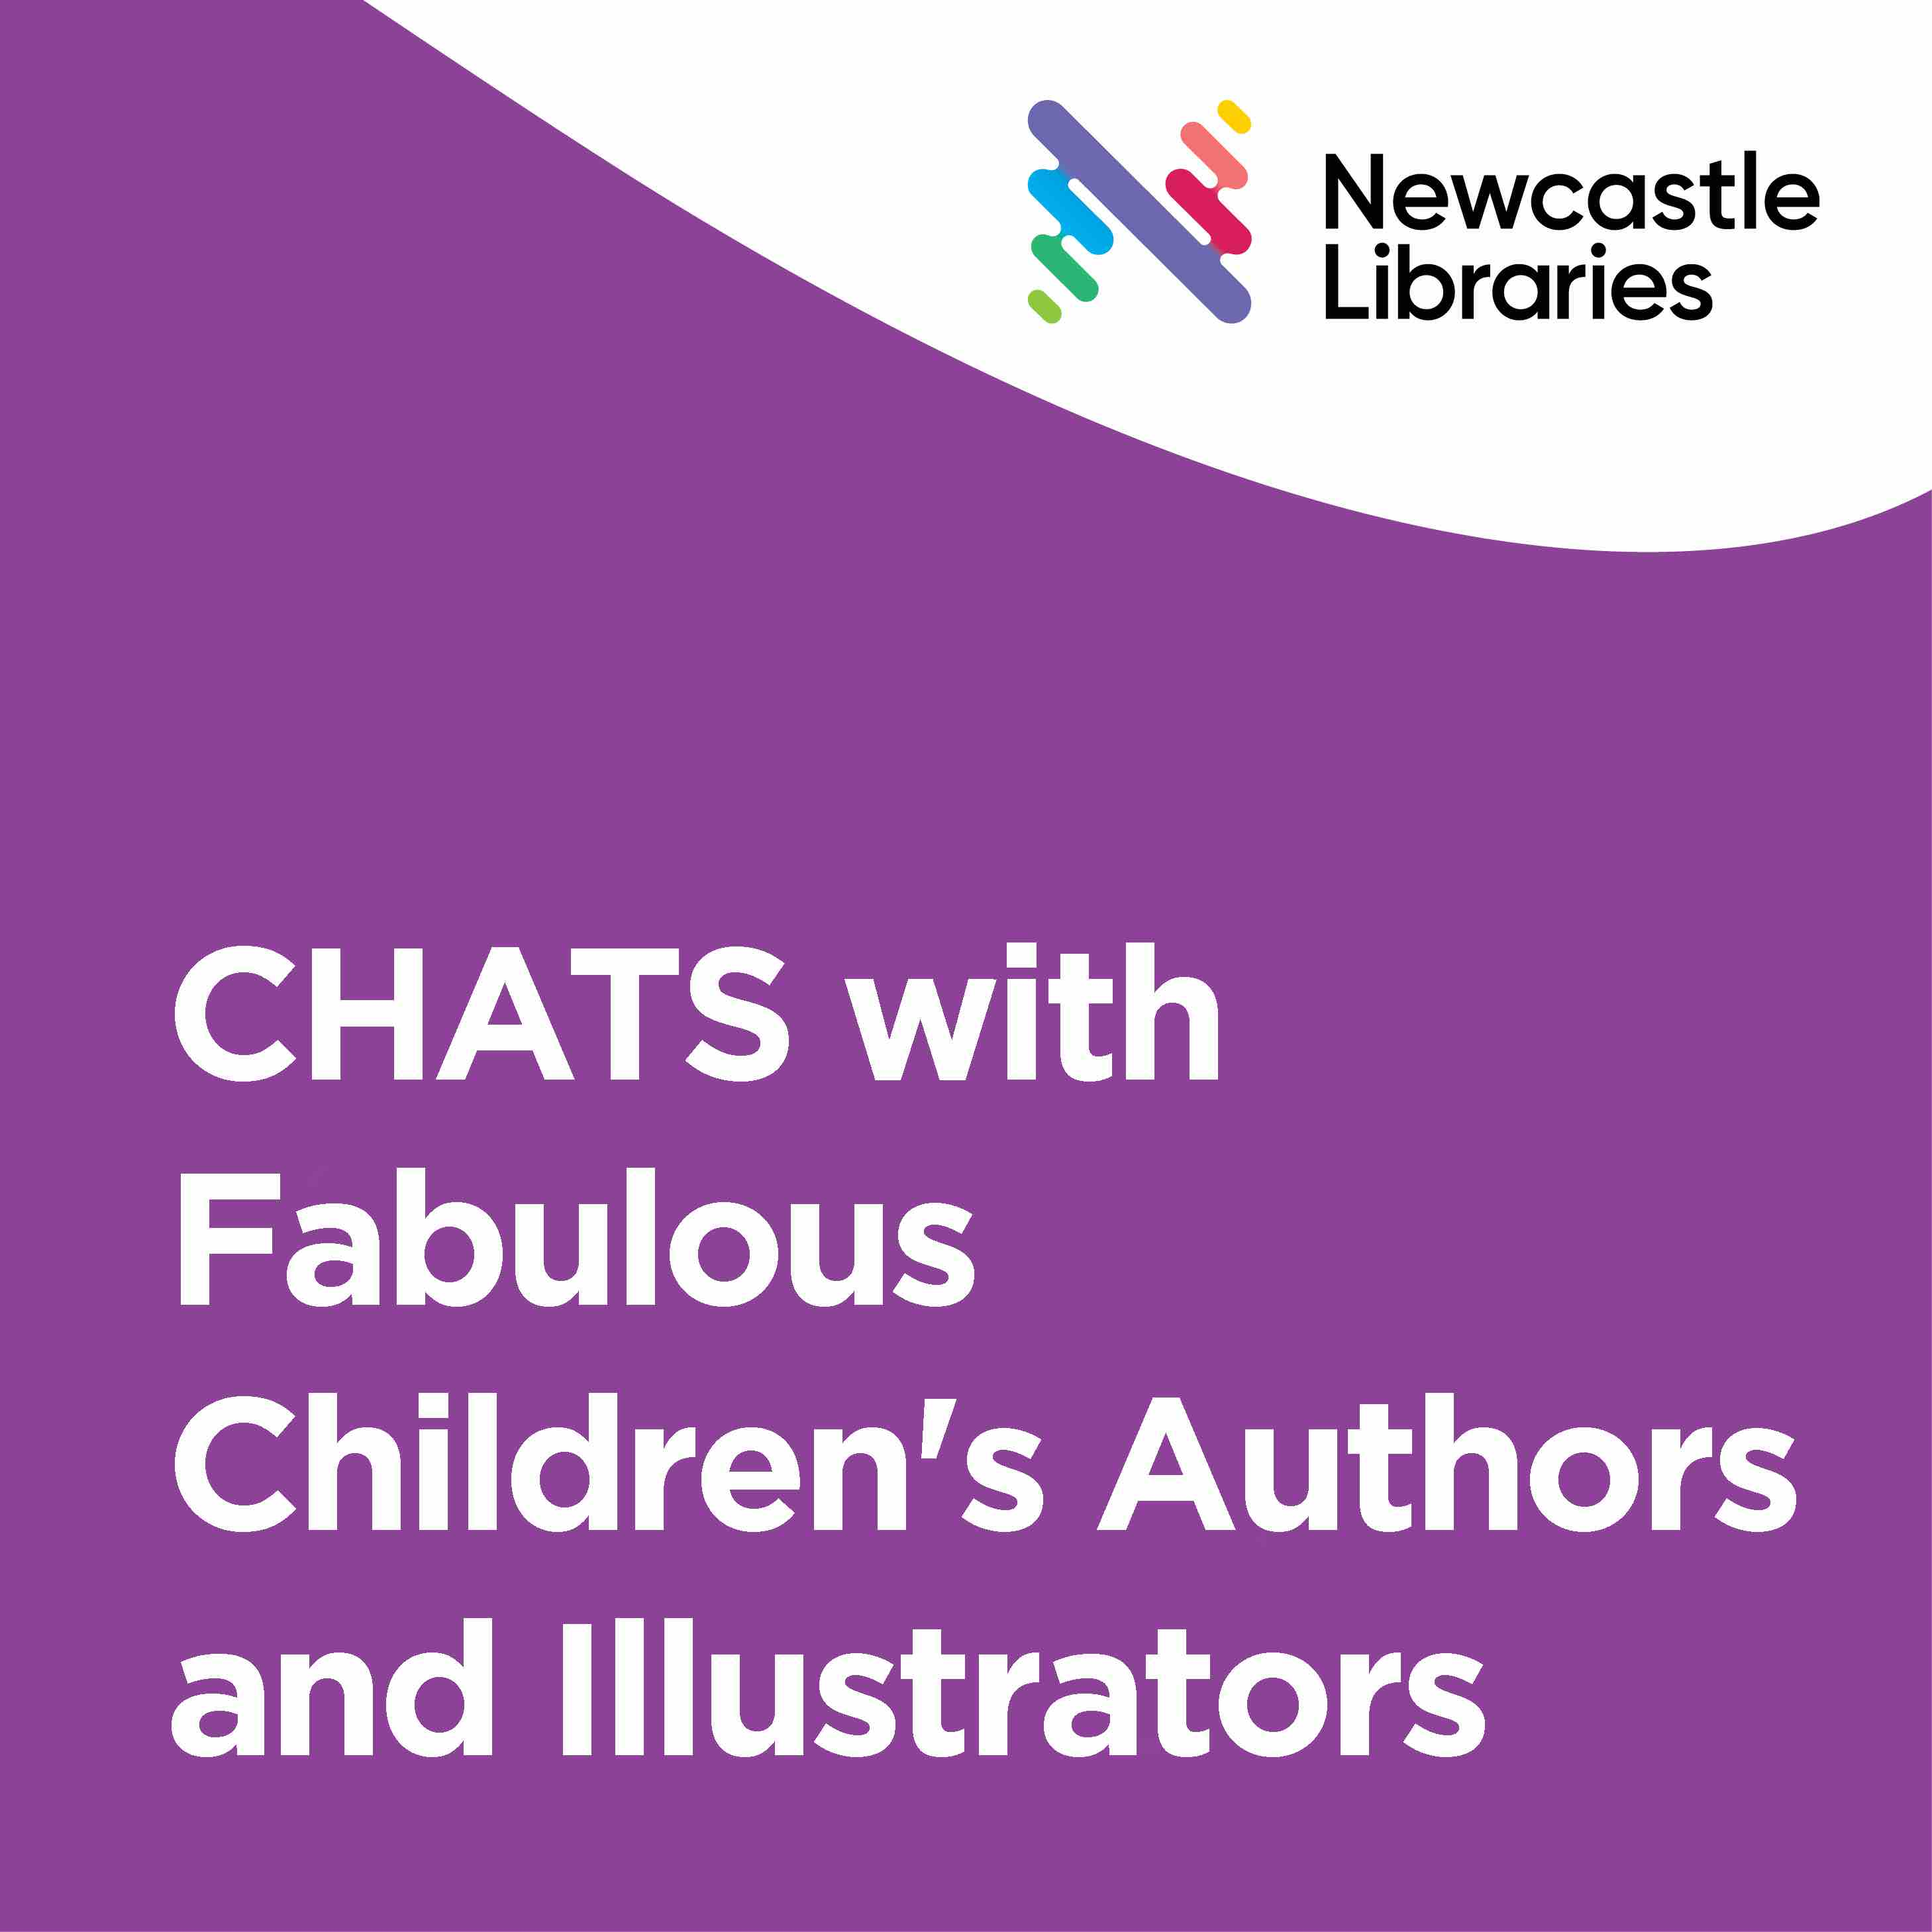 CHATS with Fabulous Children's Authors and illustrators - Leila Rudge